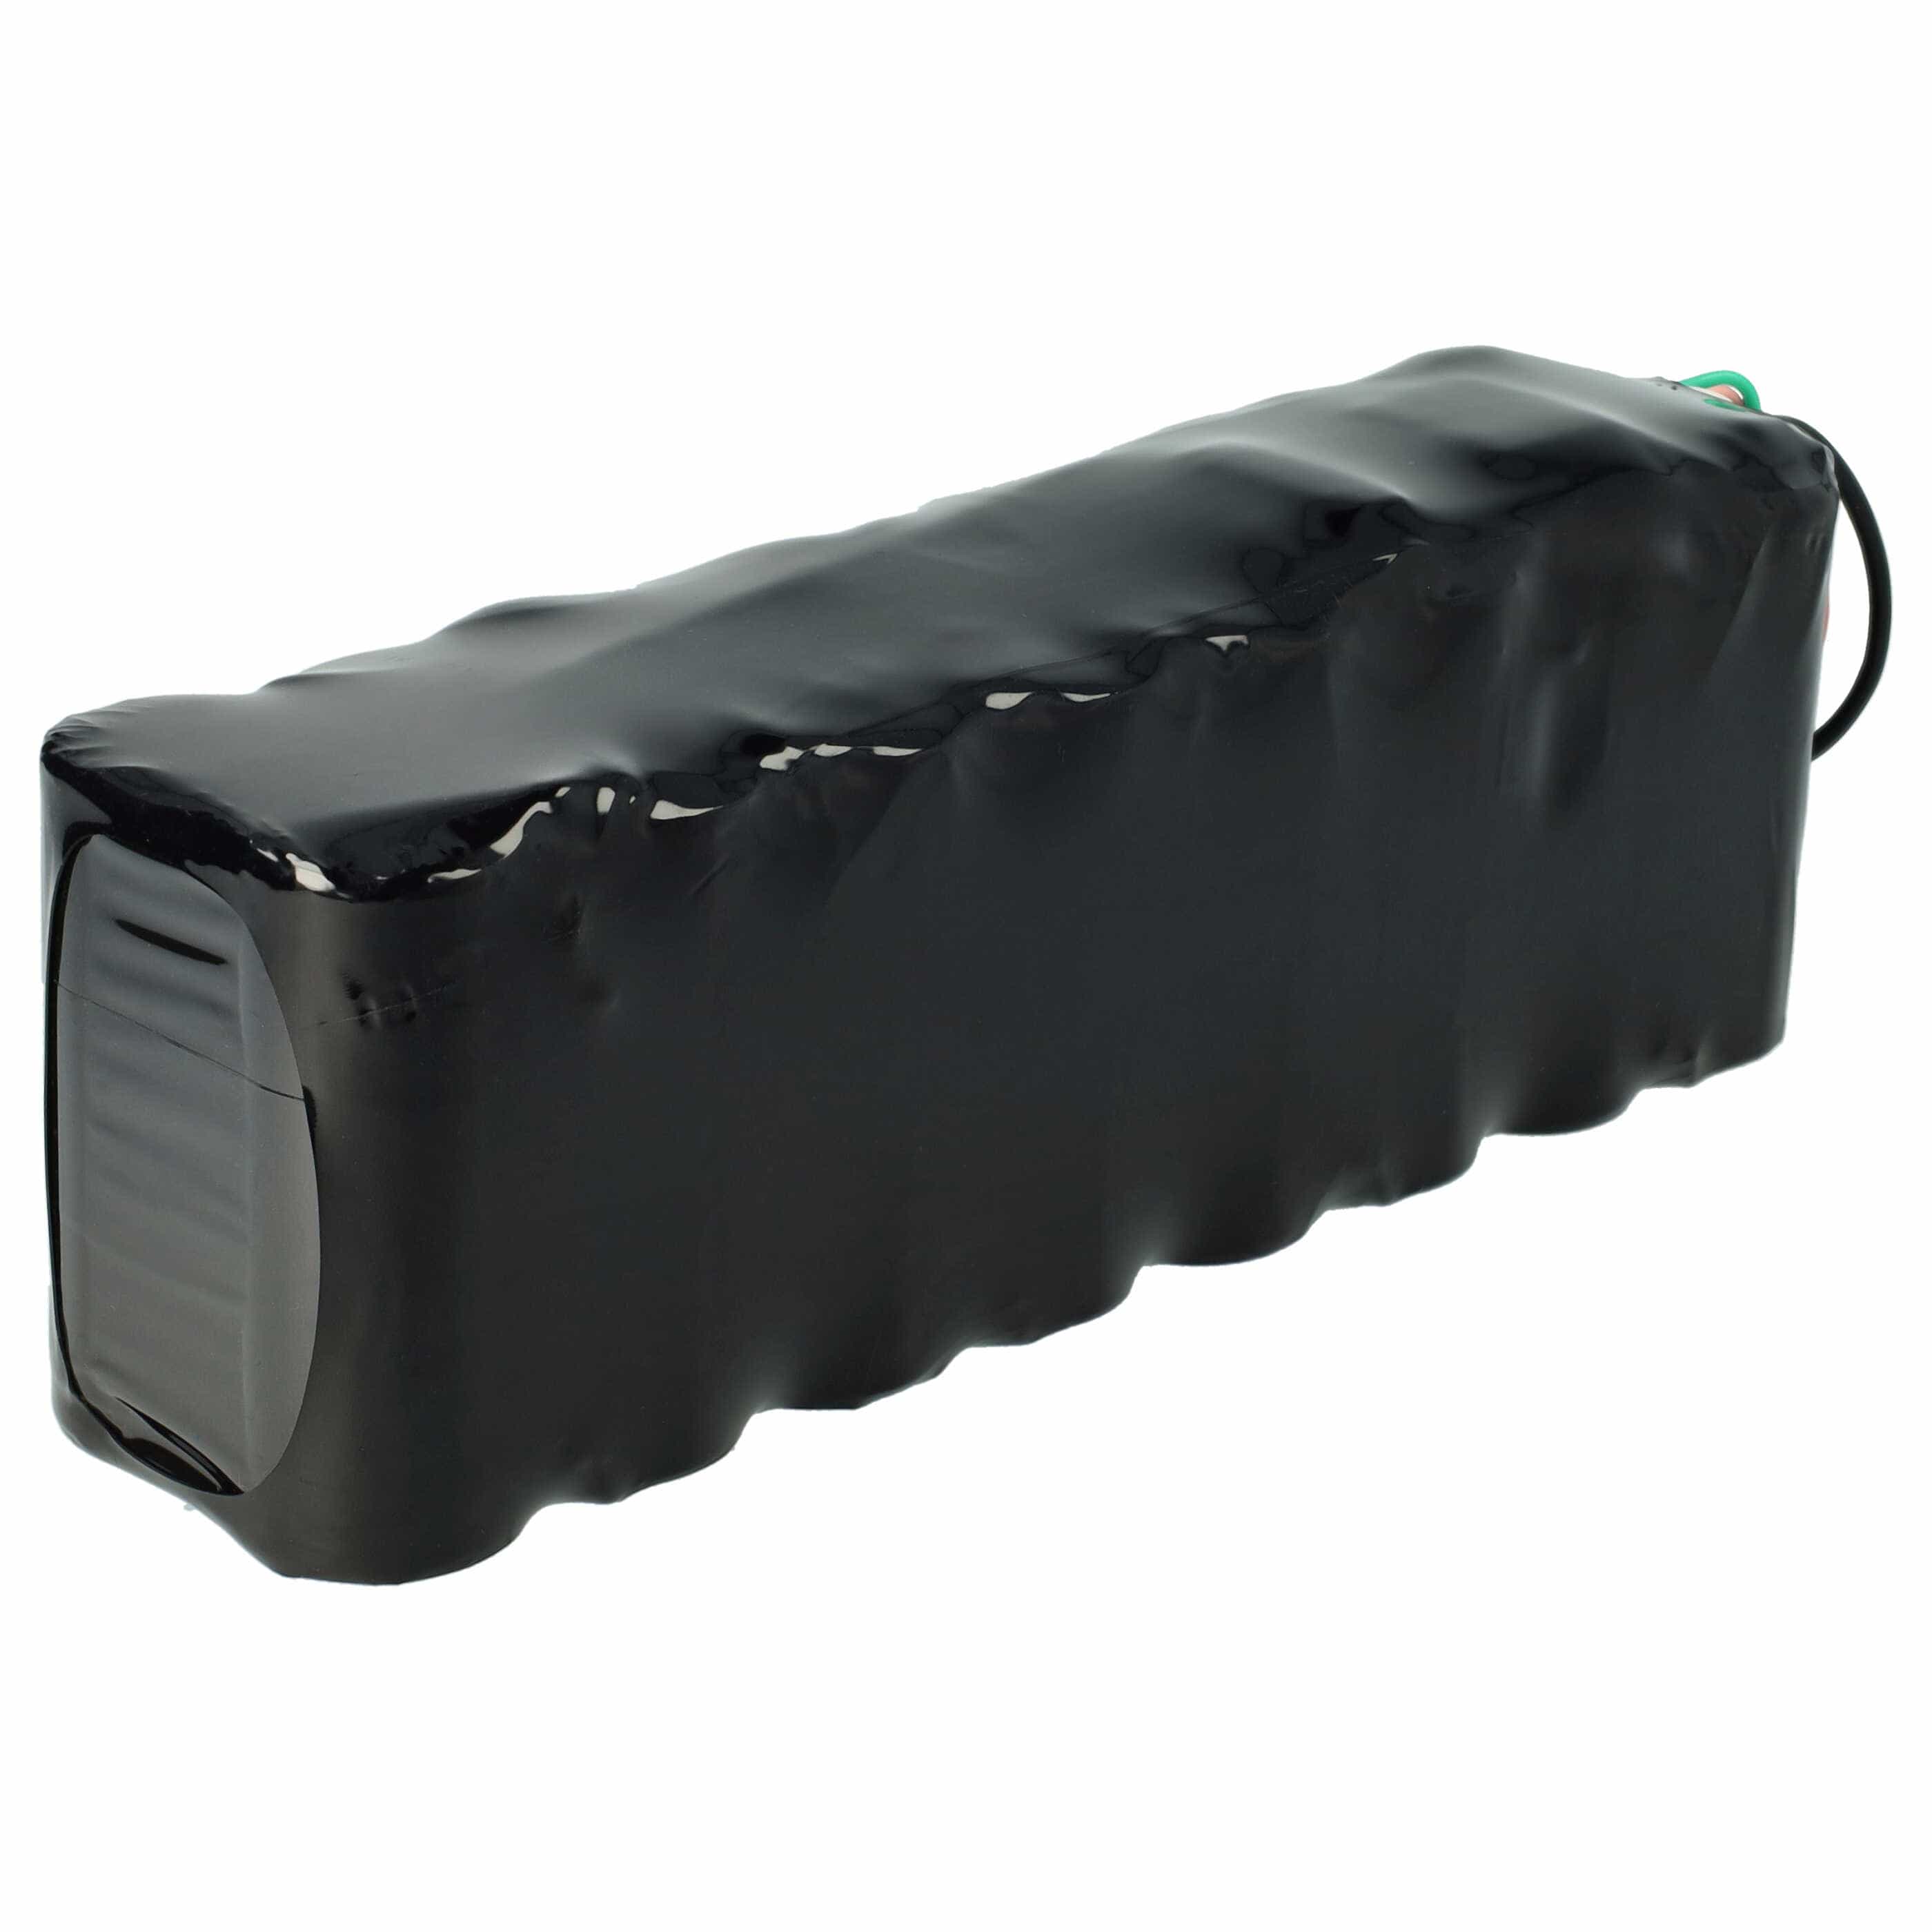 Lawnmower Battery Replacement for Robomow MRK6105A - 5000mAh 25.6V LiFePO4, black